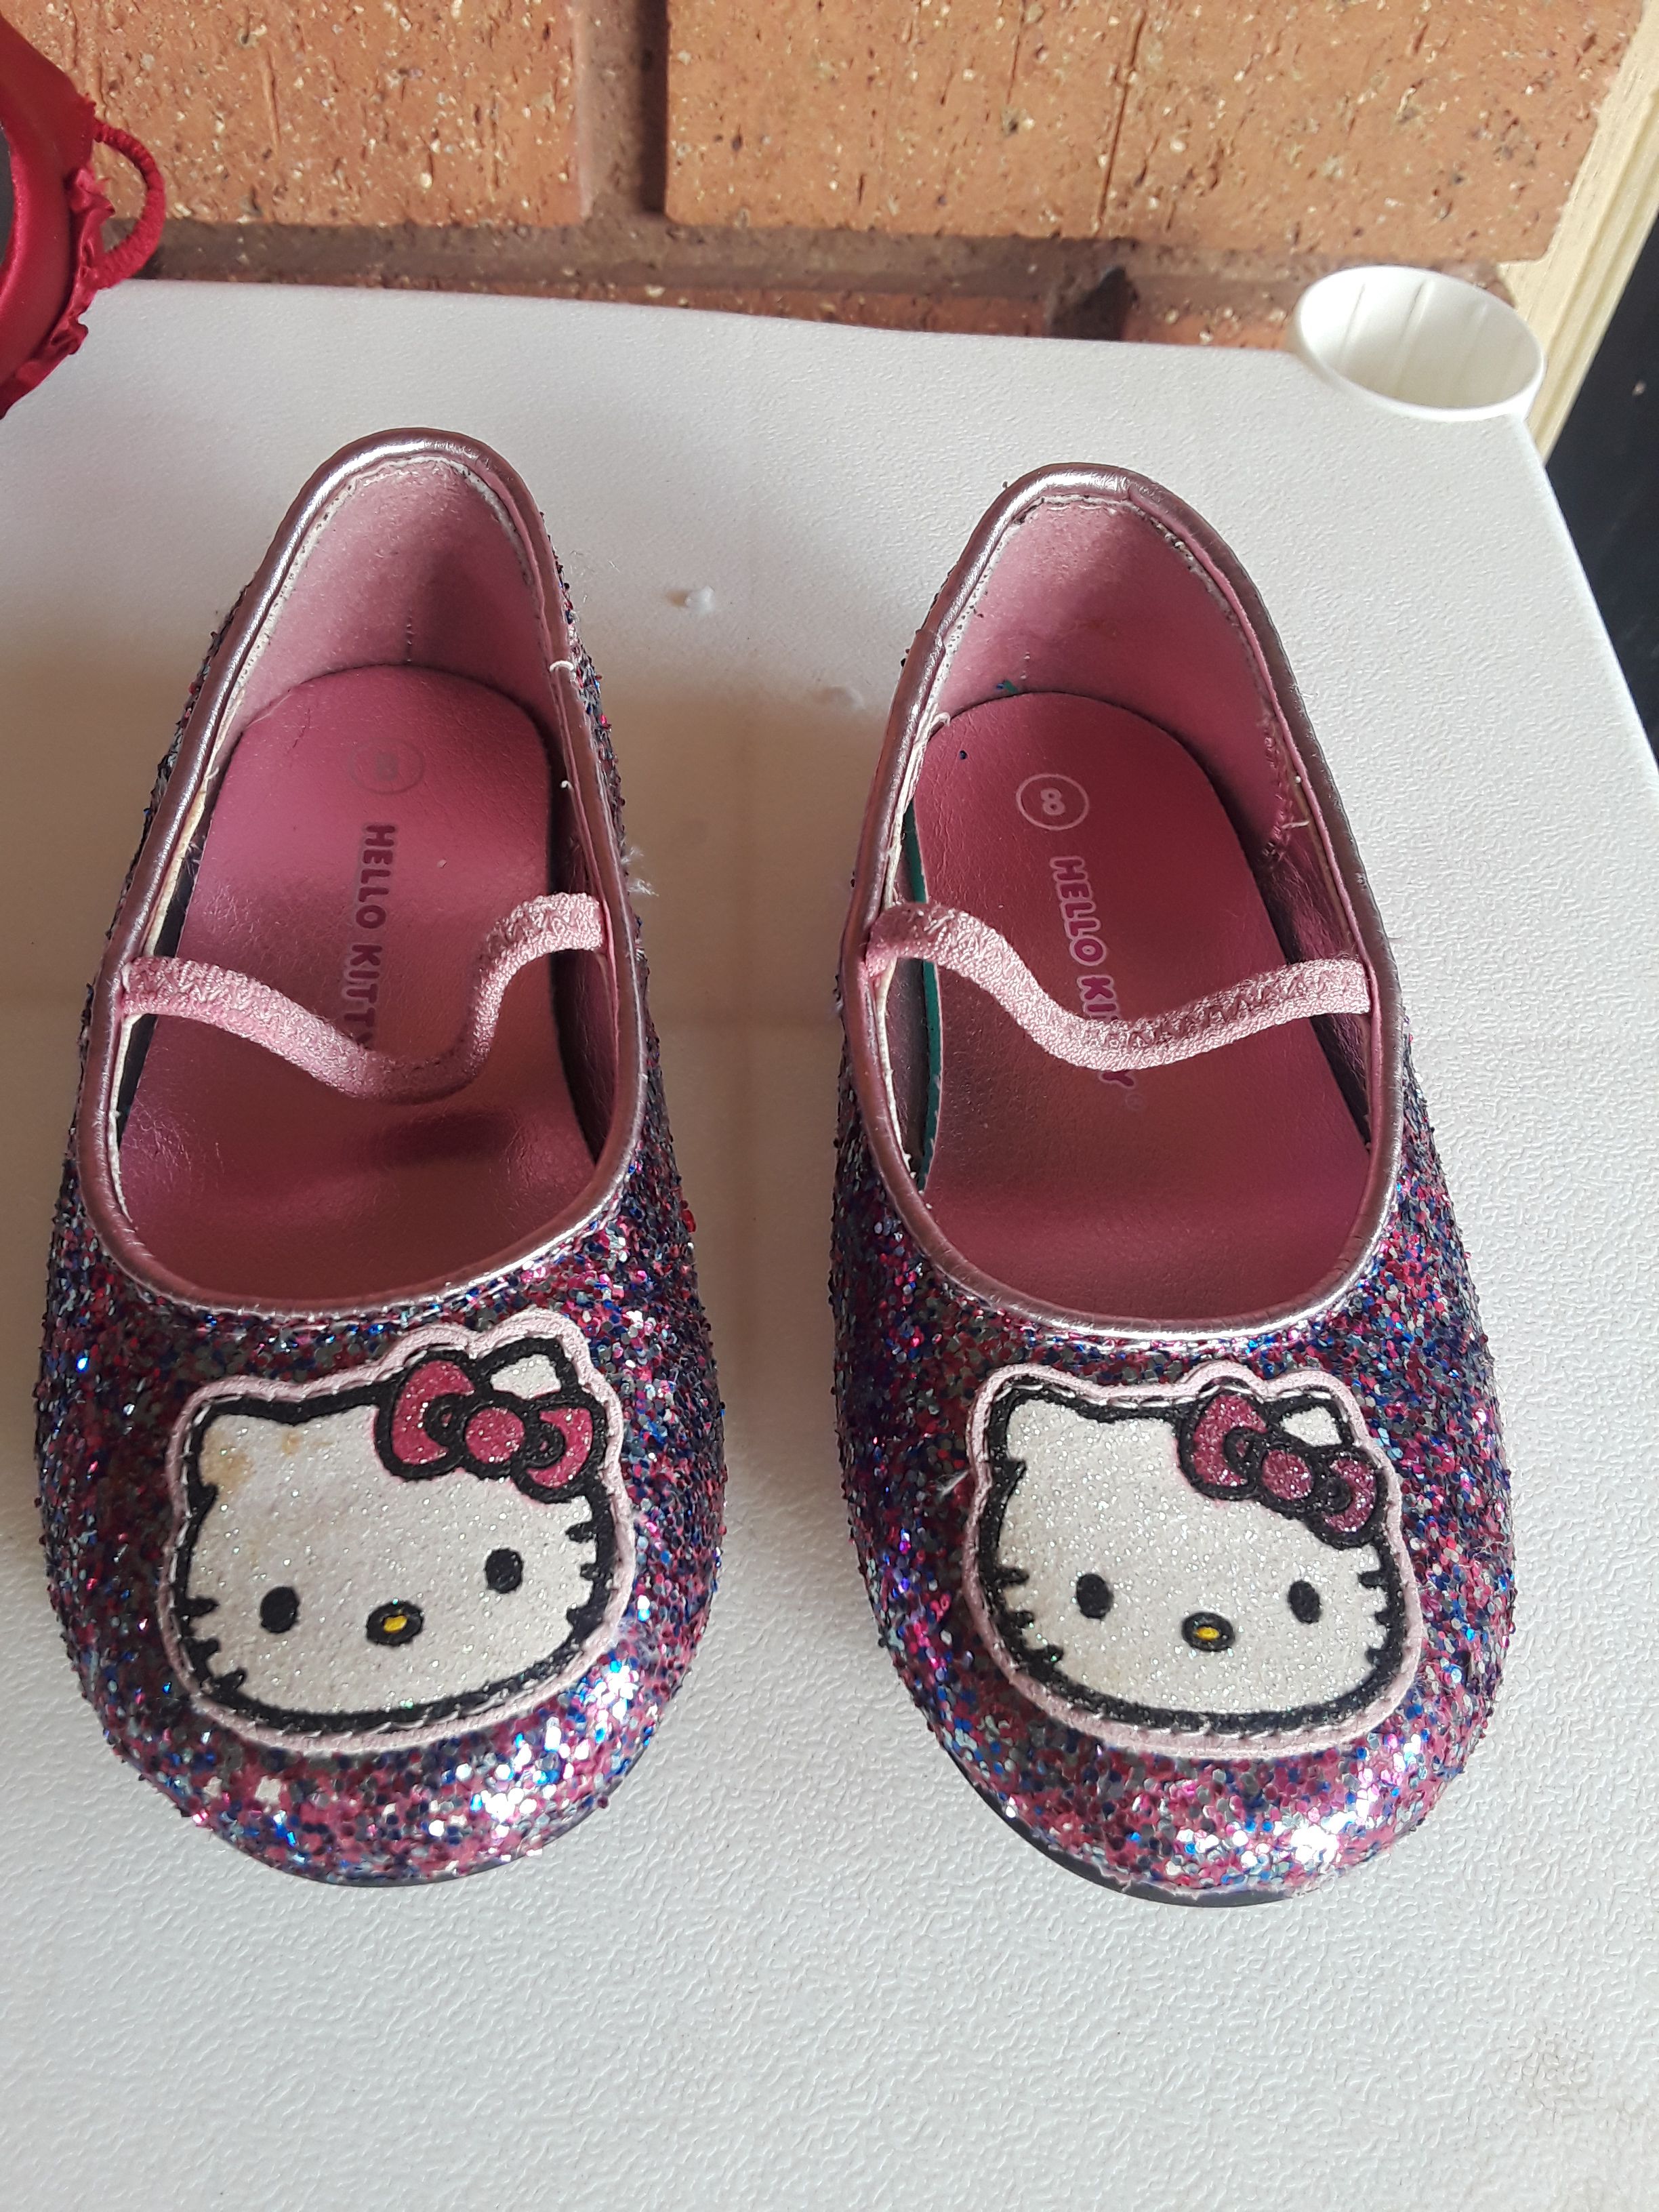 Hello Kitty shoes bran new size 8 East Fort Worth 76112